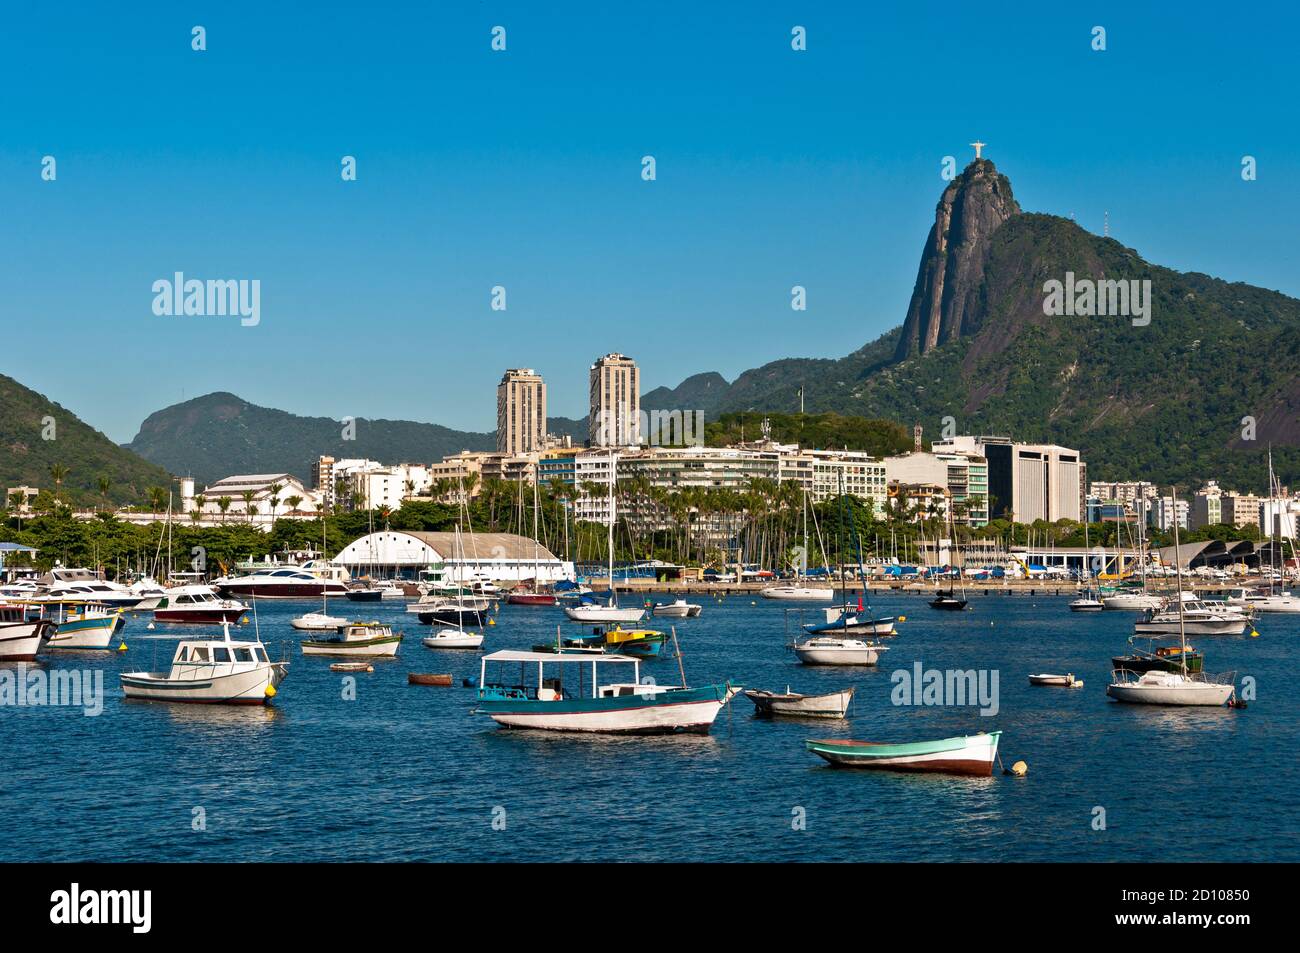 Premium Photo  Yacht club in urca bay of rio de janeiro and christ the  redeemer between the clouds leaning out